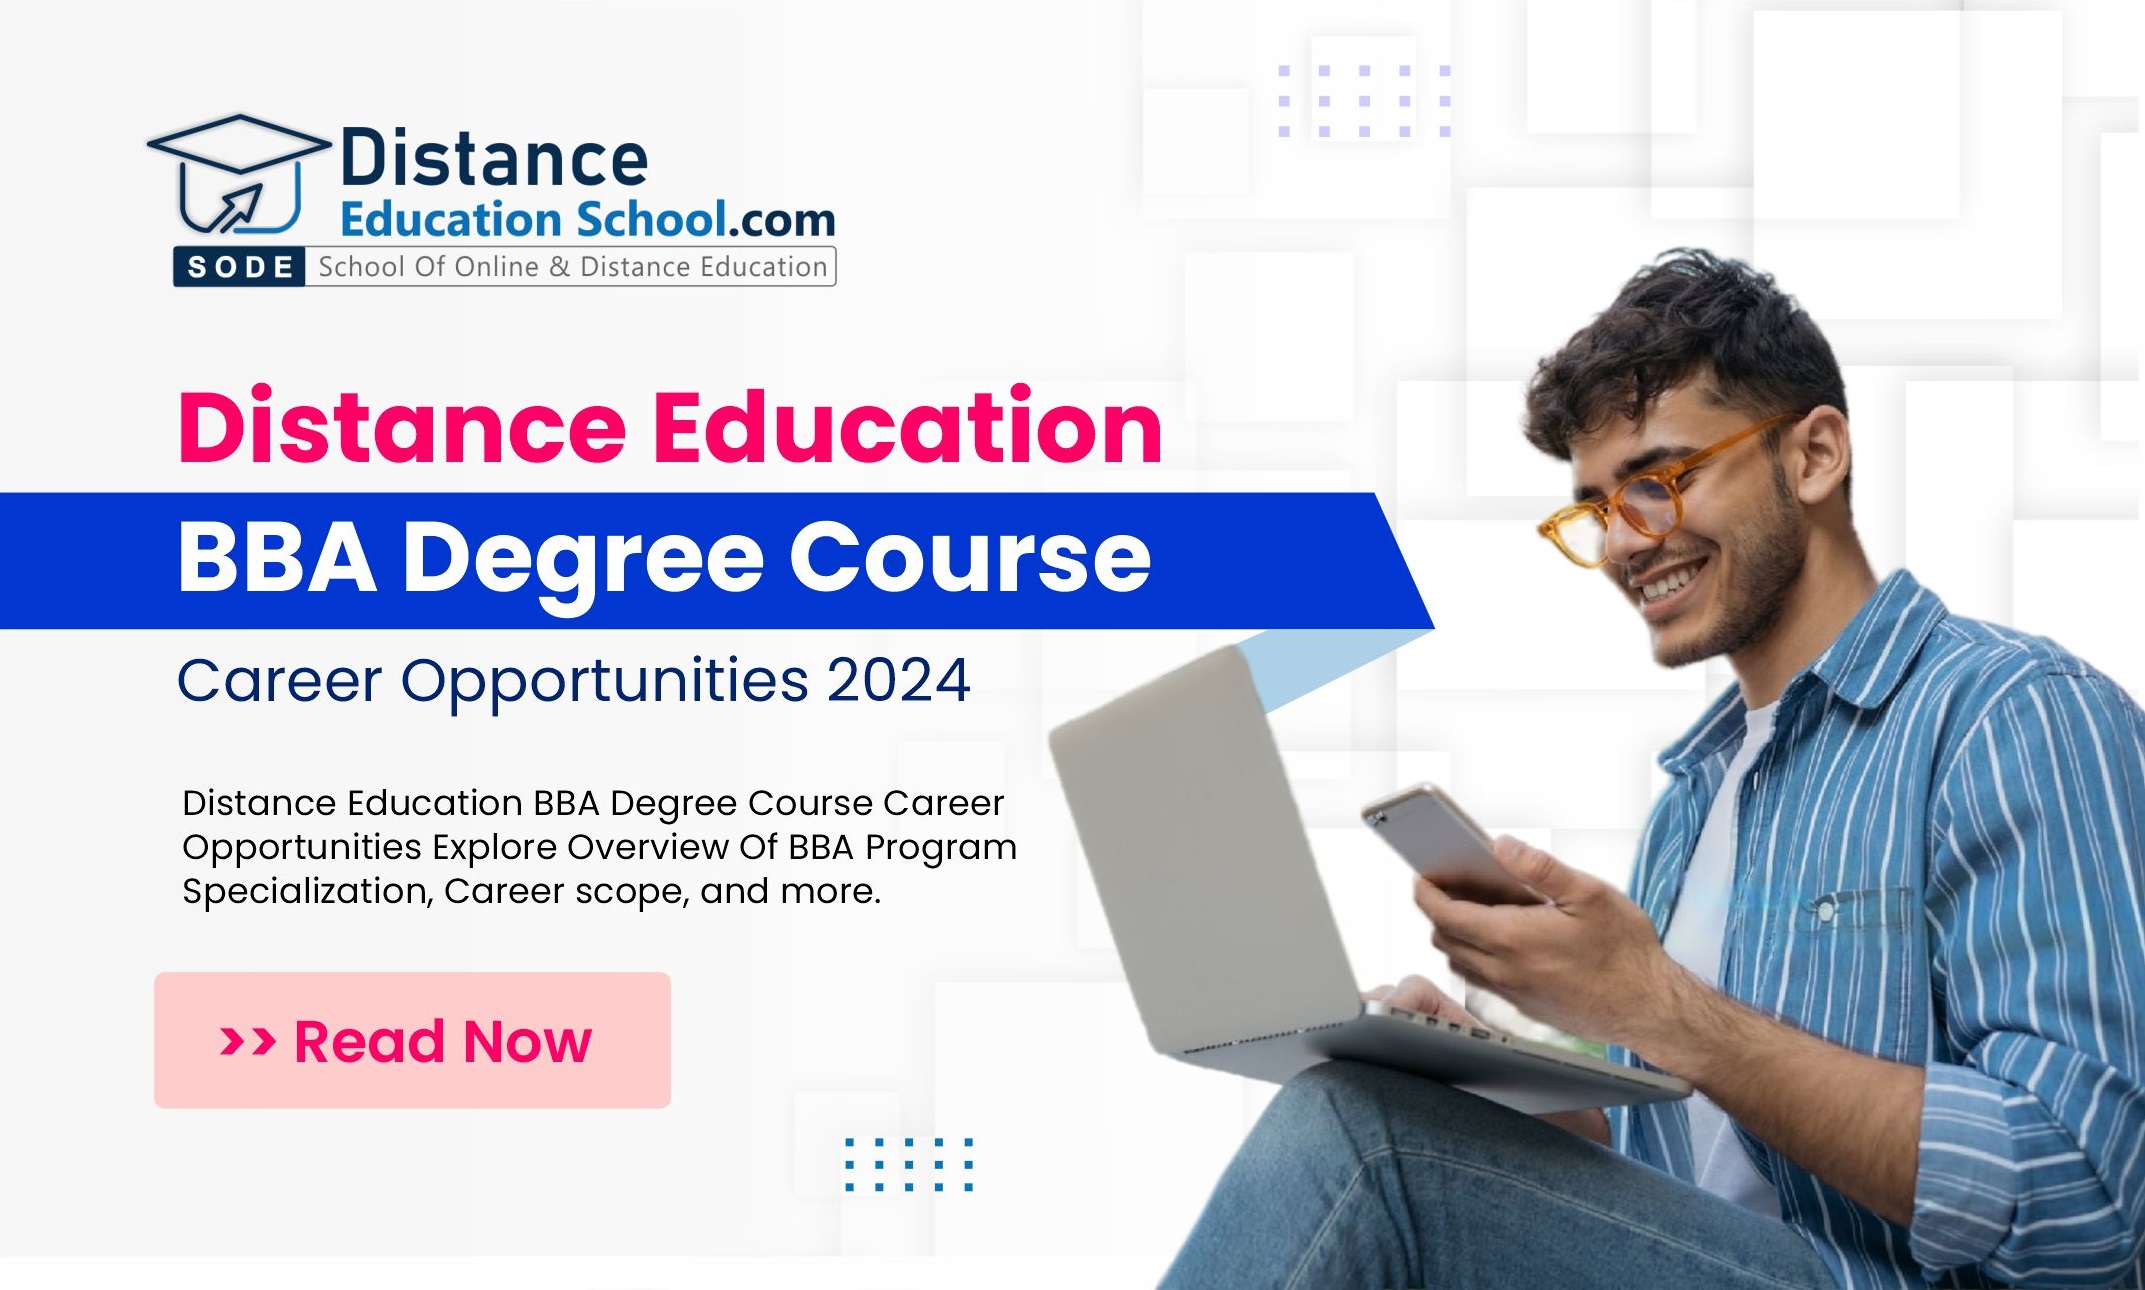 Distance Education BBA Degree Course Career Opportunities 2024